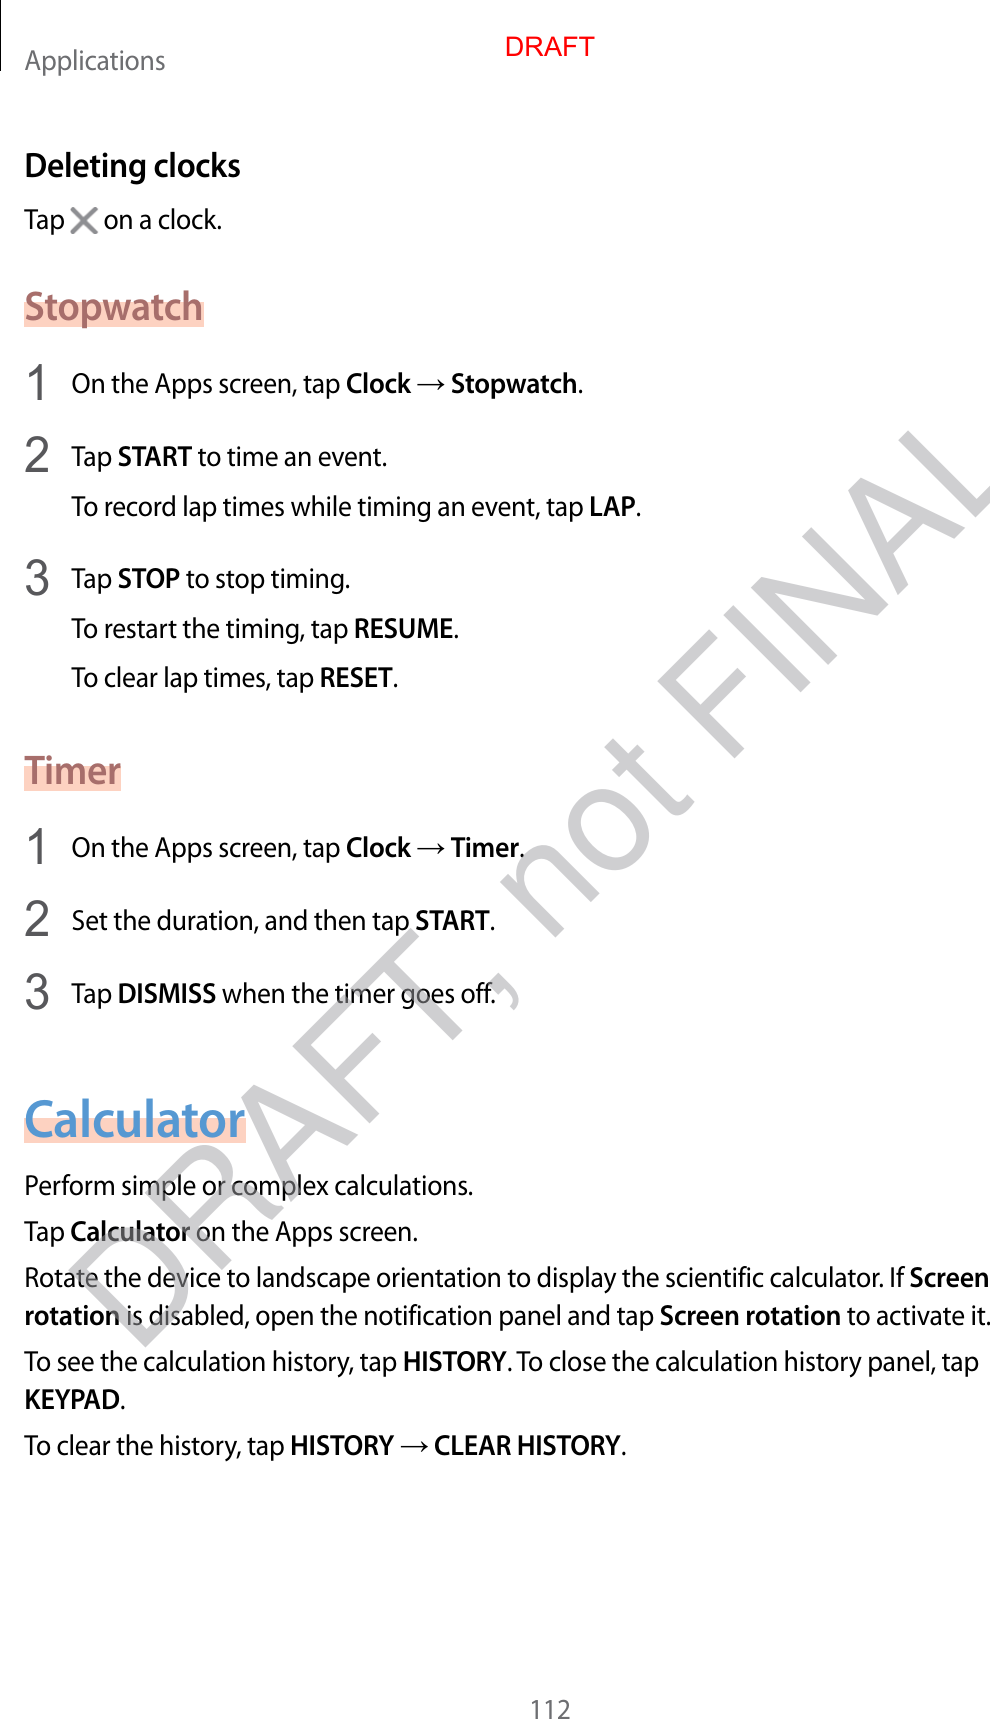 Applications112Deleting clocksTap   on a clock.Stopwatch1  On the Apps screen, tap Clock  Stopwatch.2  Tap START to time an event.To record lap times while timing an event, tap LAP.3  Tap STOP to stop timing.To restart the timing, tap RESUME.To clear lap times, tap RESET.Timer1  On the Apps screen, tap Clock  Timer.2  Set the duration, and then tap START.3  Tap DISMISS when the timer goes off.CalculatorPerform simple or complex calculations.Tap Calculator on the Apps screen.Rotate the device to landscape orientation to display the scientific calculator. If Screen rotation is disabled, open the notification panel and tap Screen rotation to activate it.To see the calculation history, tap HISTORY. To close the calculation history panel, tap KEYPAD.To clear the history, tap HISTORY  CLEAR HISTORY.DRAFTDRAFT, not FINAL